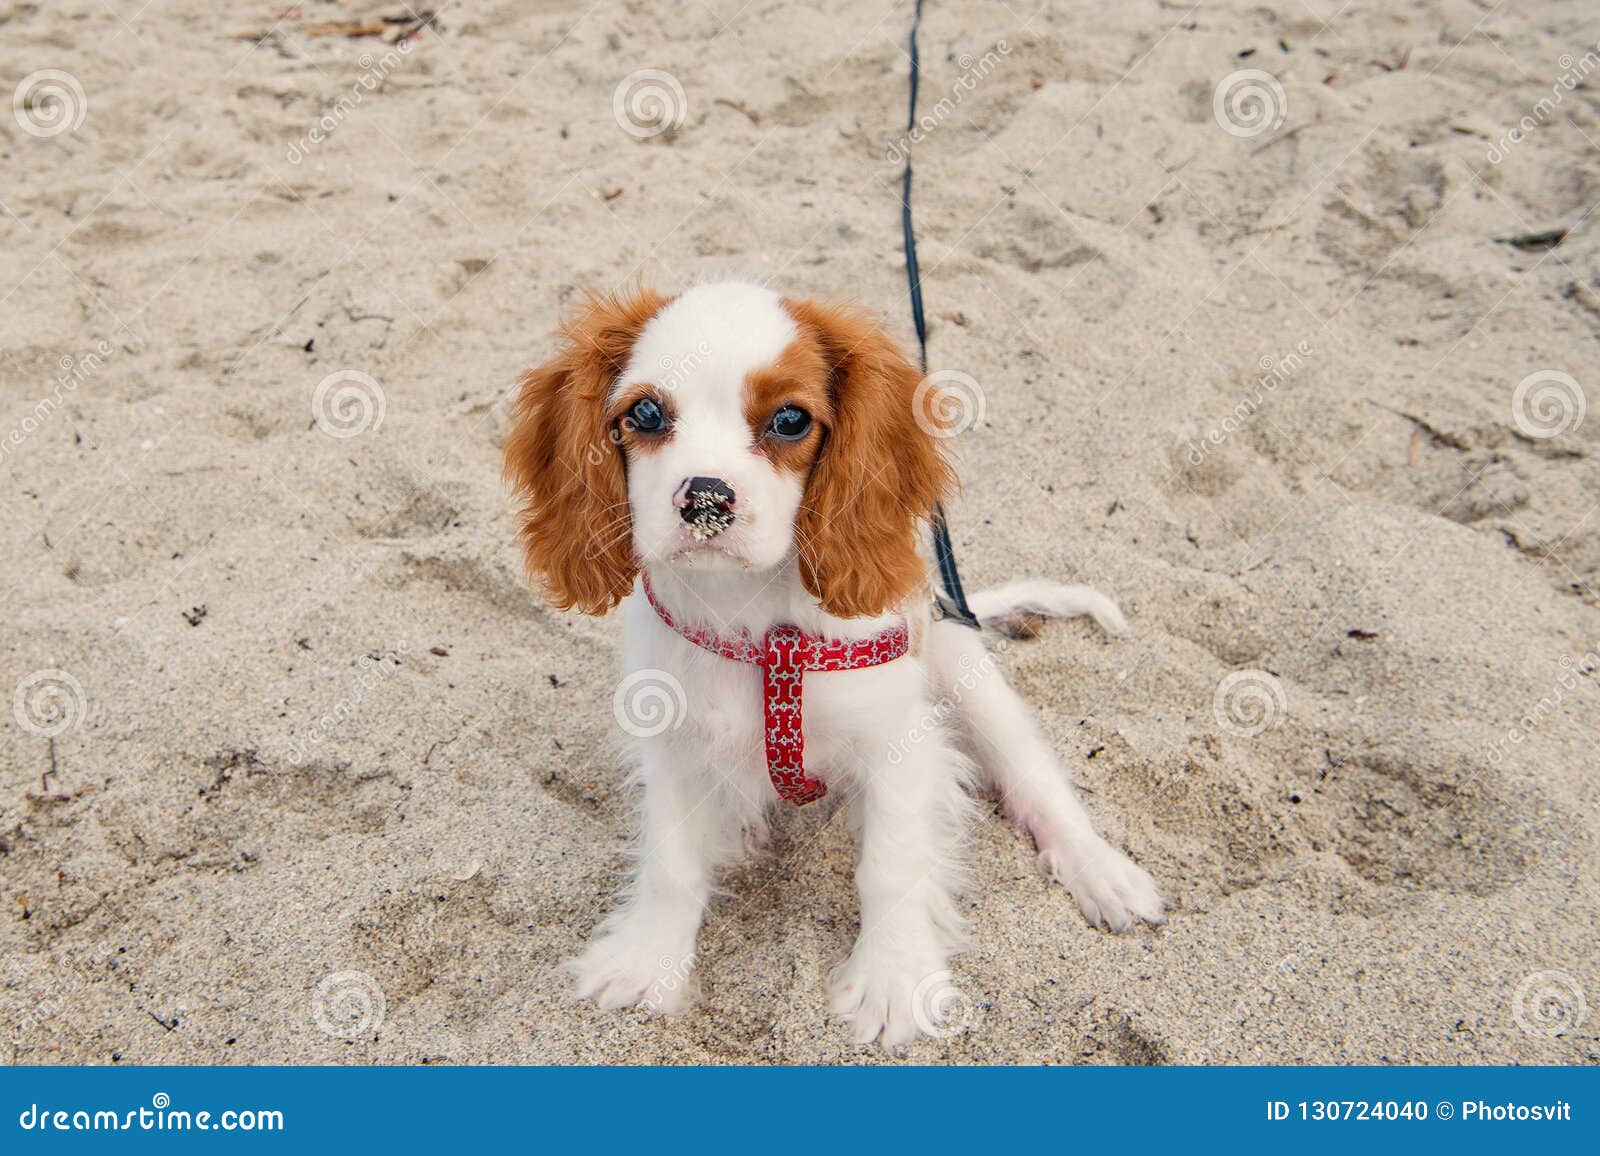 Dog or Cavalier King Charles Spaniel Puppy Stock Photo - of small, long: 130724040